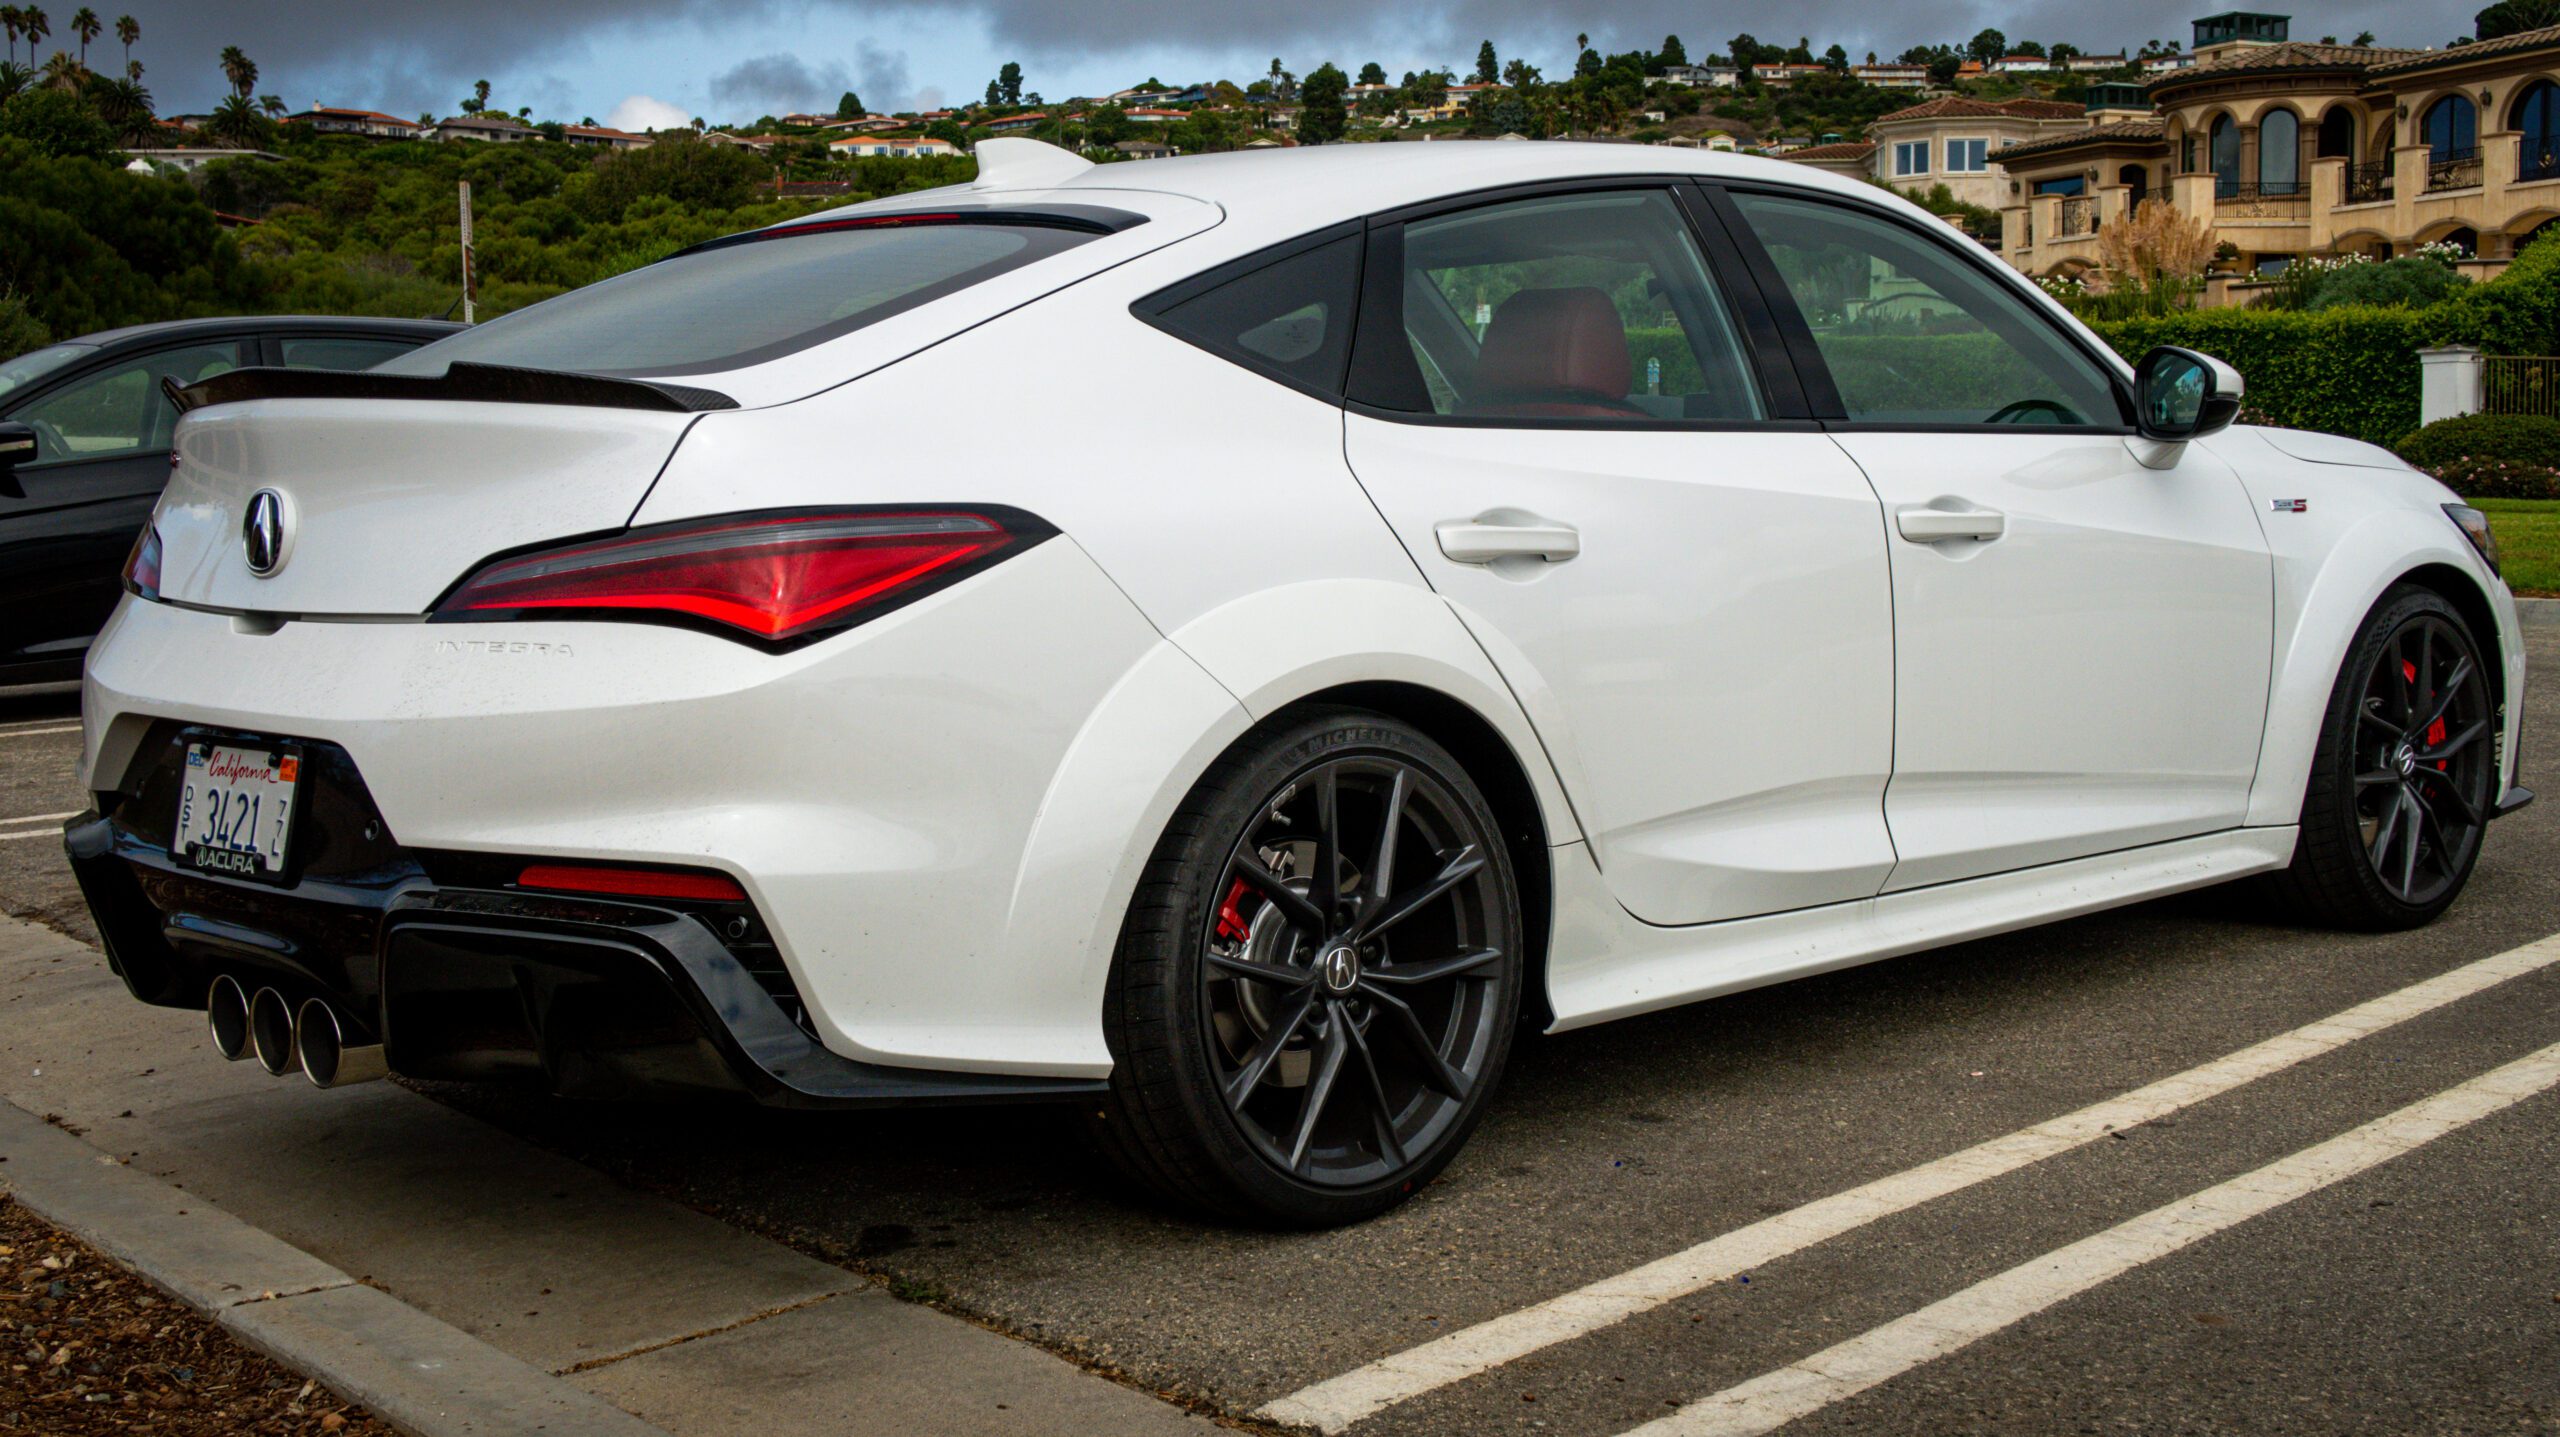 Honda Civic Type R: 'A monster disguised as a family hatch', Motoring